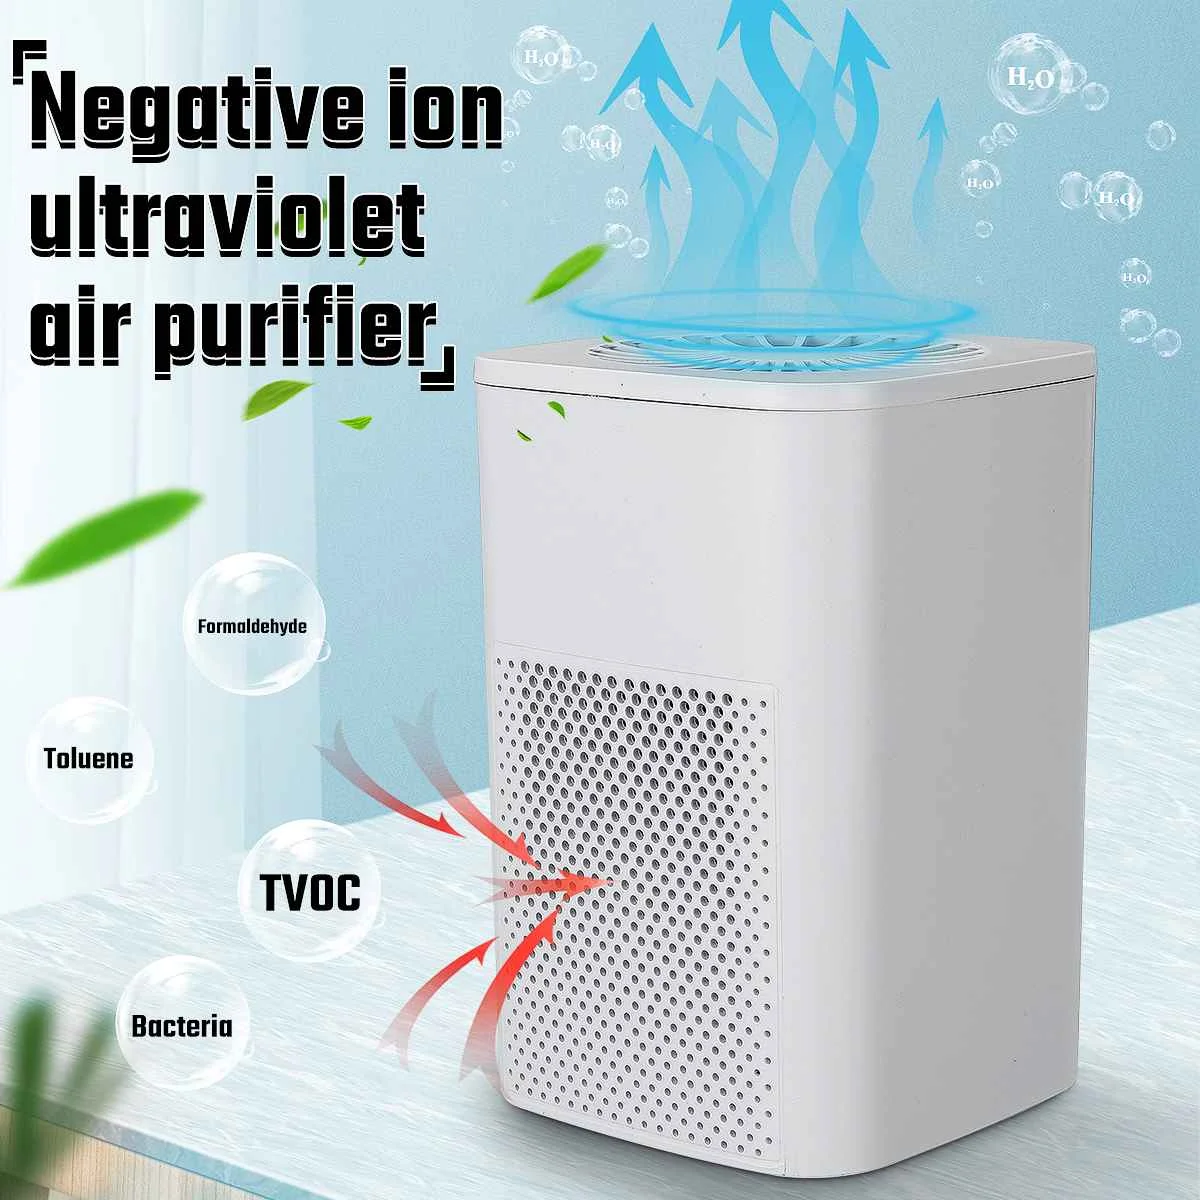 

New Mini Portable Air Purifier USB Low Noise Formaldehyde Dust Removal Smoke Filter PM 2.5 Anti-Allergic Smart Home Air Purifier